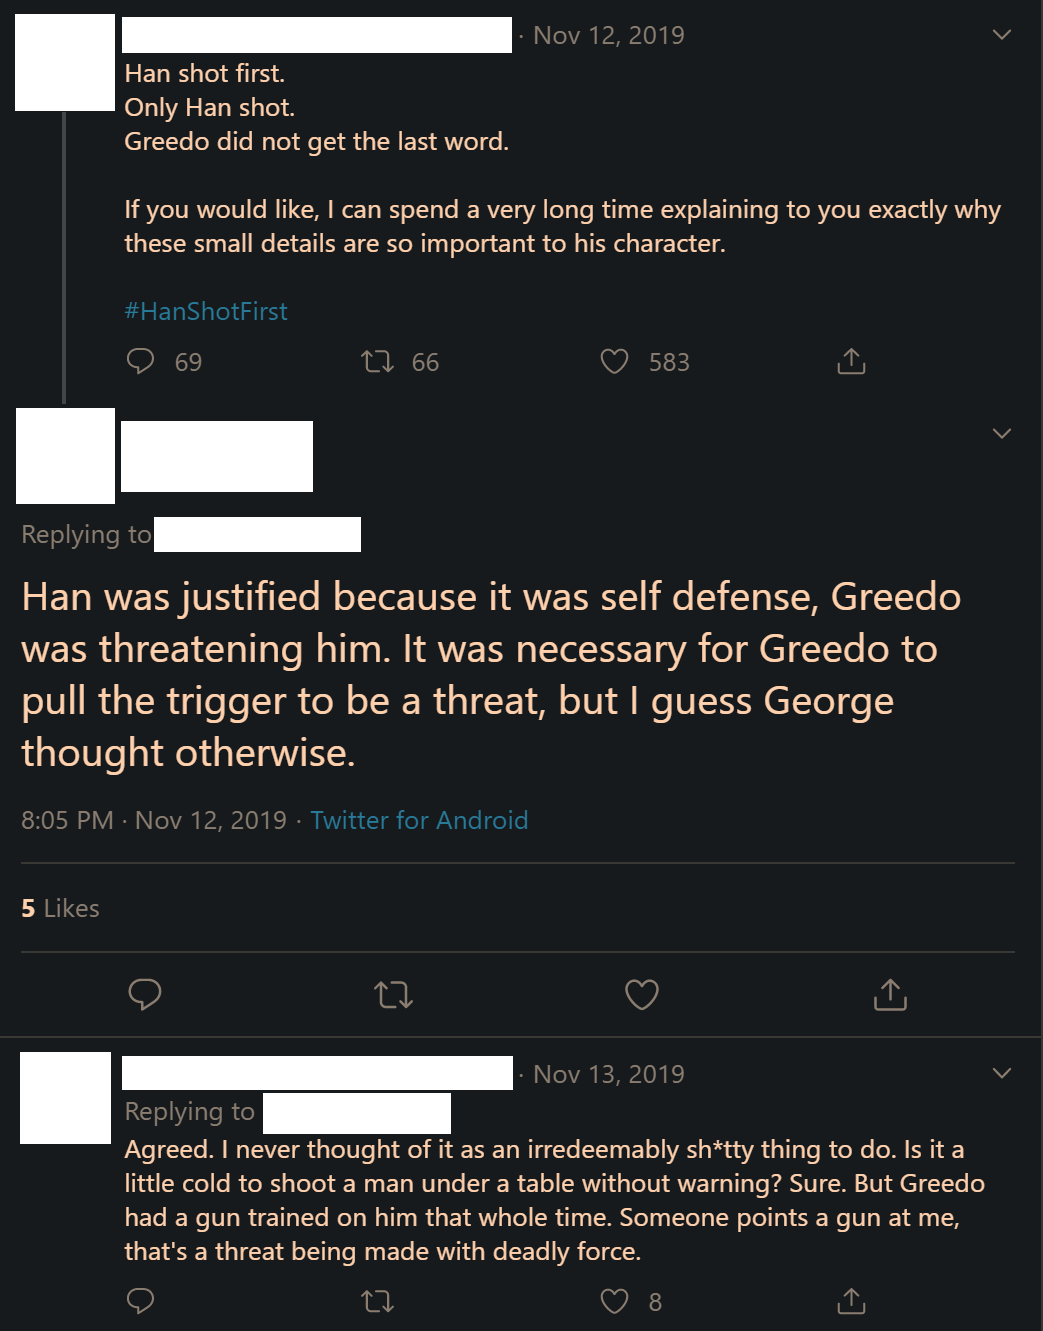 Image from Twitter: Subject 1: 'Han shot first. Only Han shot. Greedo did not get the last word. If you would like, I can spend a very long time explaining to you exactly why these small details are so important to his character. #HanShotFirst' Subject 2: 'Han was justified because it was self defense, Greedo was threatening him. It was necessary for Greedo to pull the trigger to be a thread, but I guess George thought otherwise.' Subject 1: 'Agreed. I never thought of it as an irredeemably sh*tty thing to do. Is it a little cold to shoot a man under a table without warning? Sure. But Greedo had a gun trained on him that whole time. Someone points a gun at me, that’s a threat being made with deadly force.'